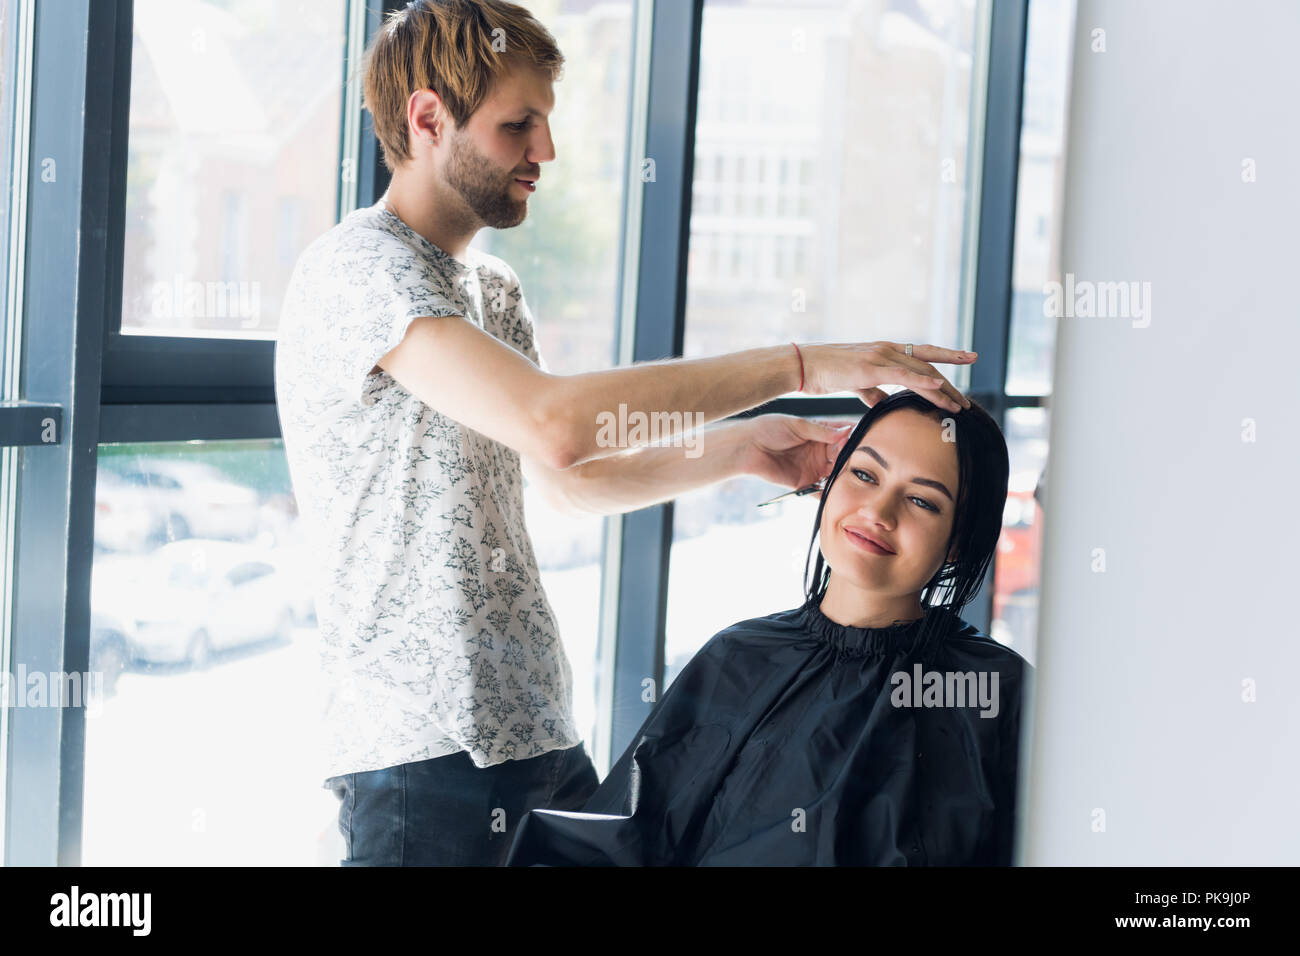 Young beautiful woman having her hair cut at the hairdresser's. Enjoying the process of making a new hair style. Stock Photo